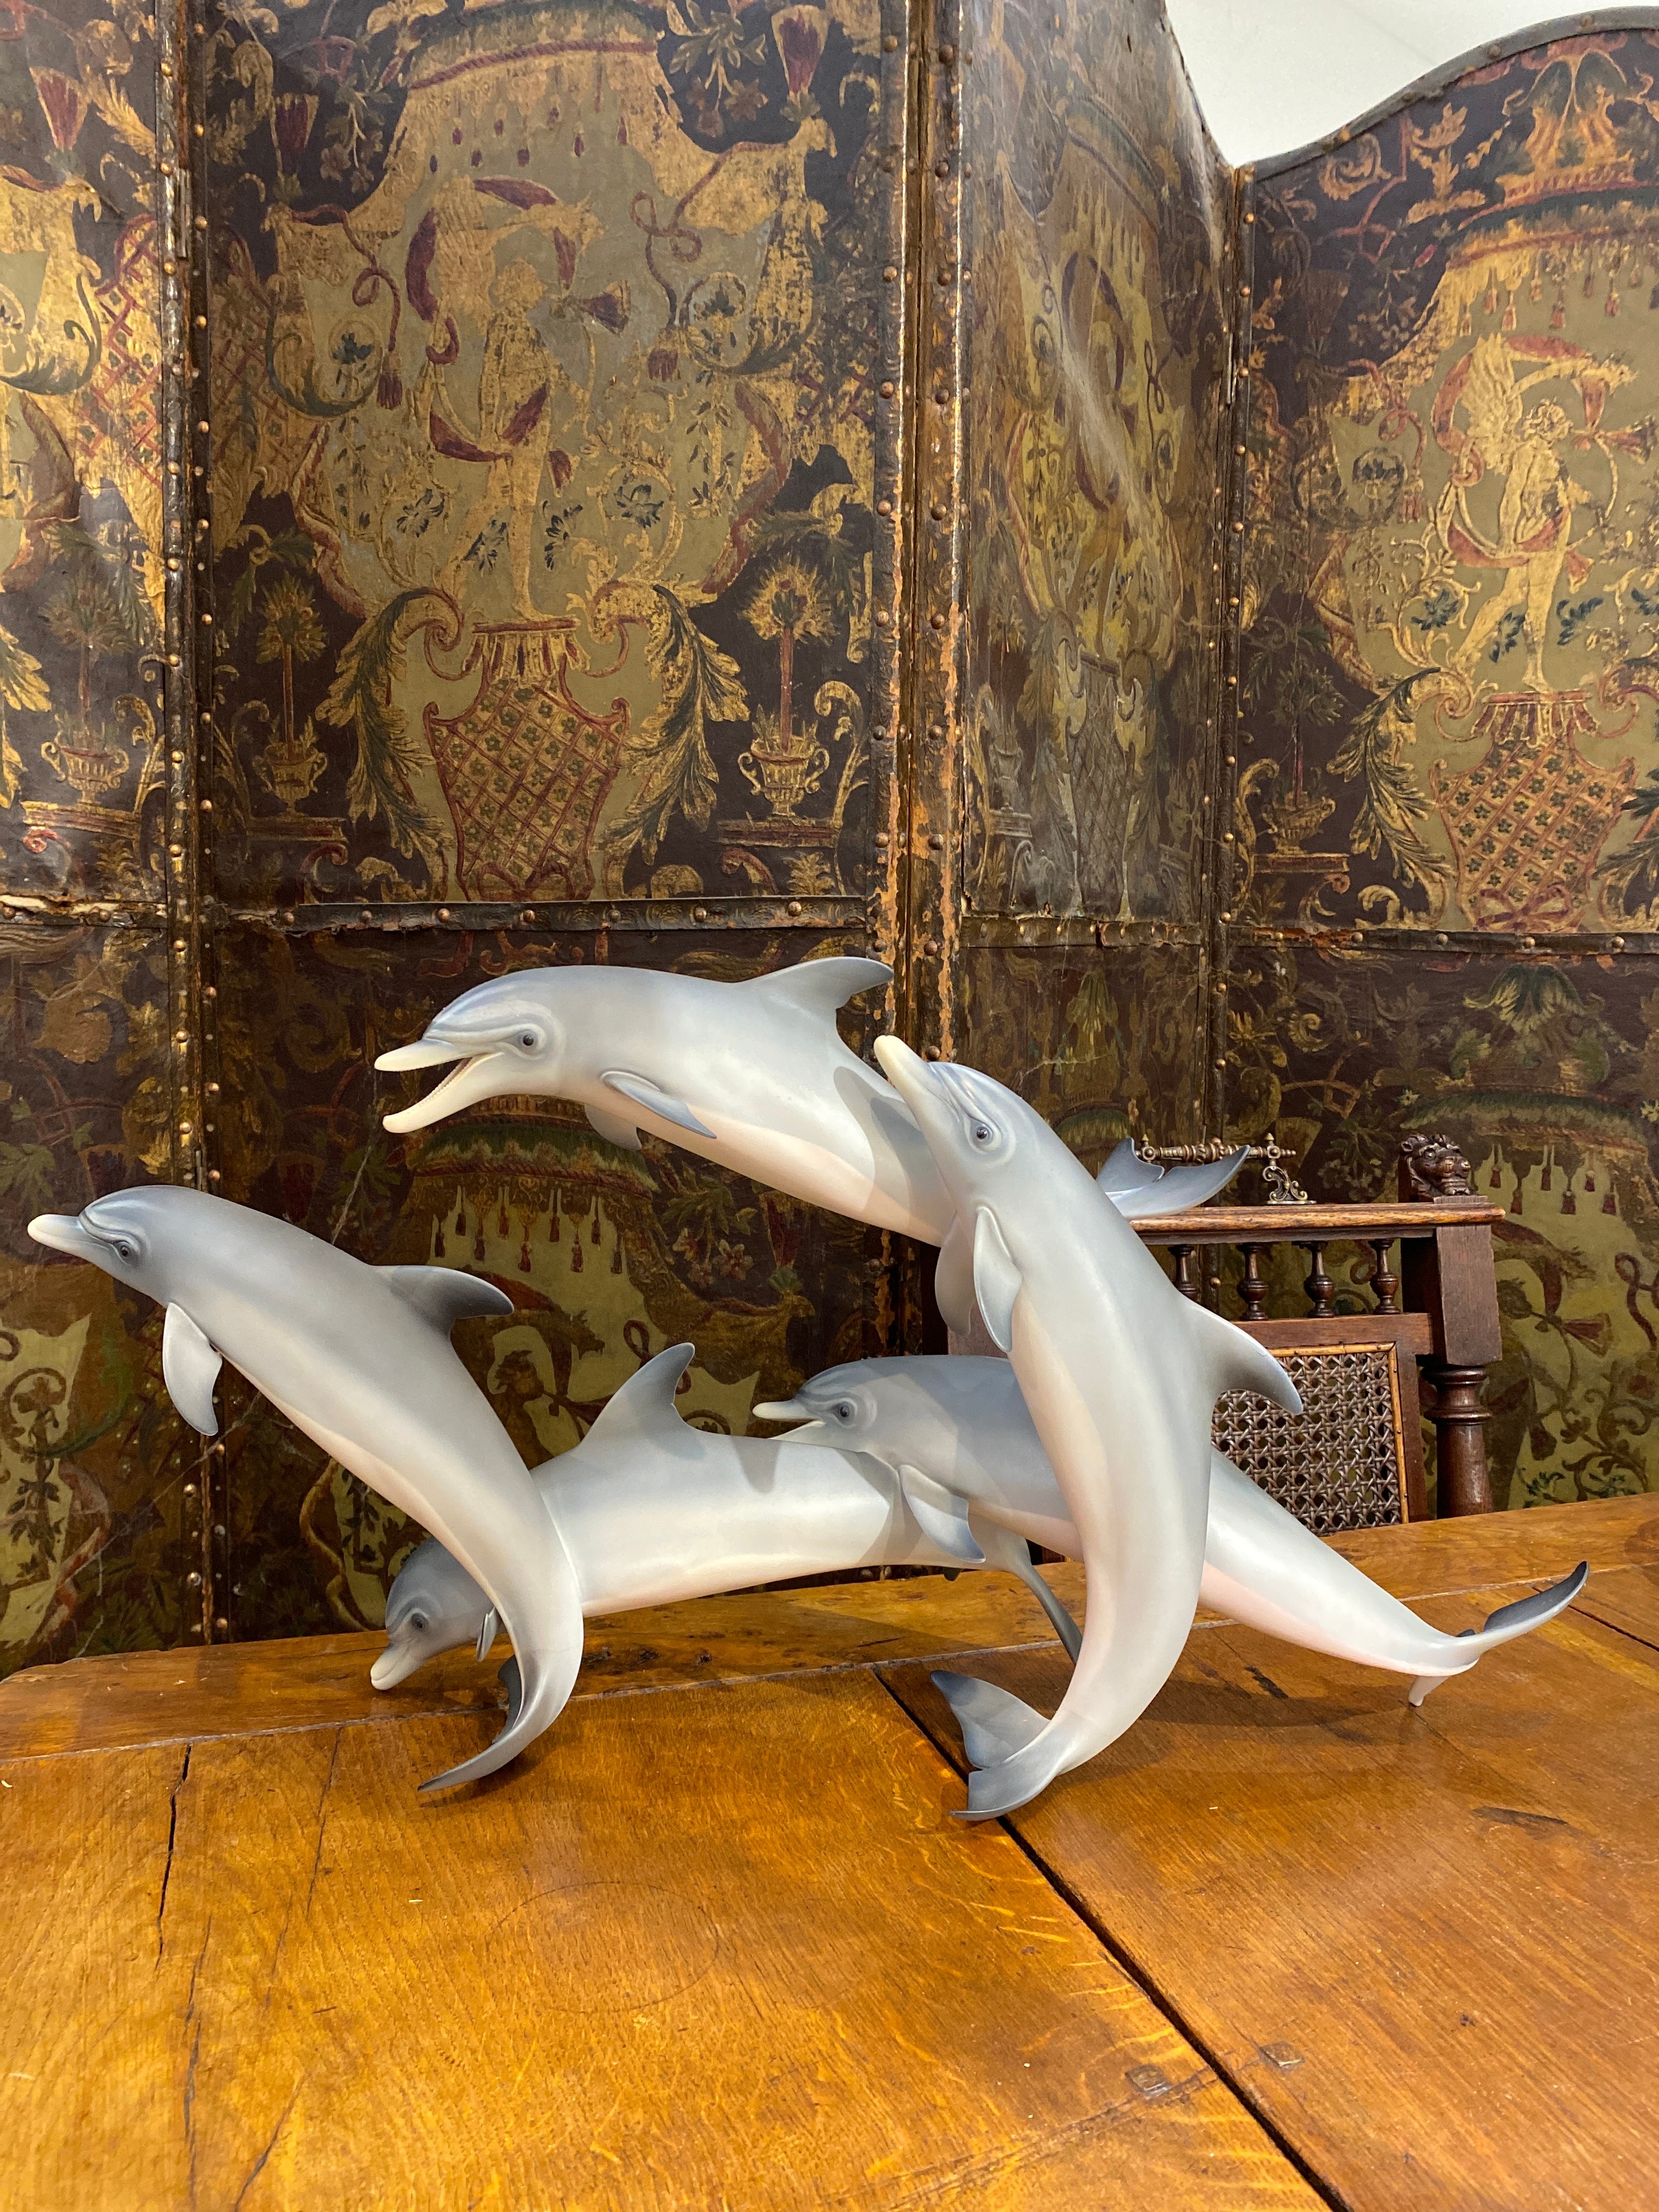 A figural group of dolphins by Hutschenreuther, limited edition 87/100, 33cm x 67cm - Image 2 of 3